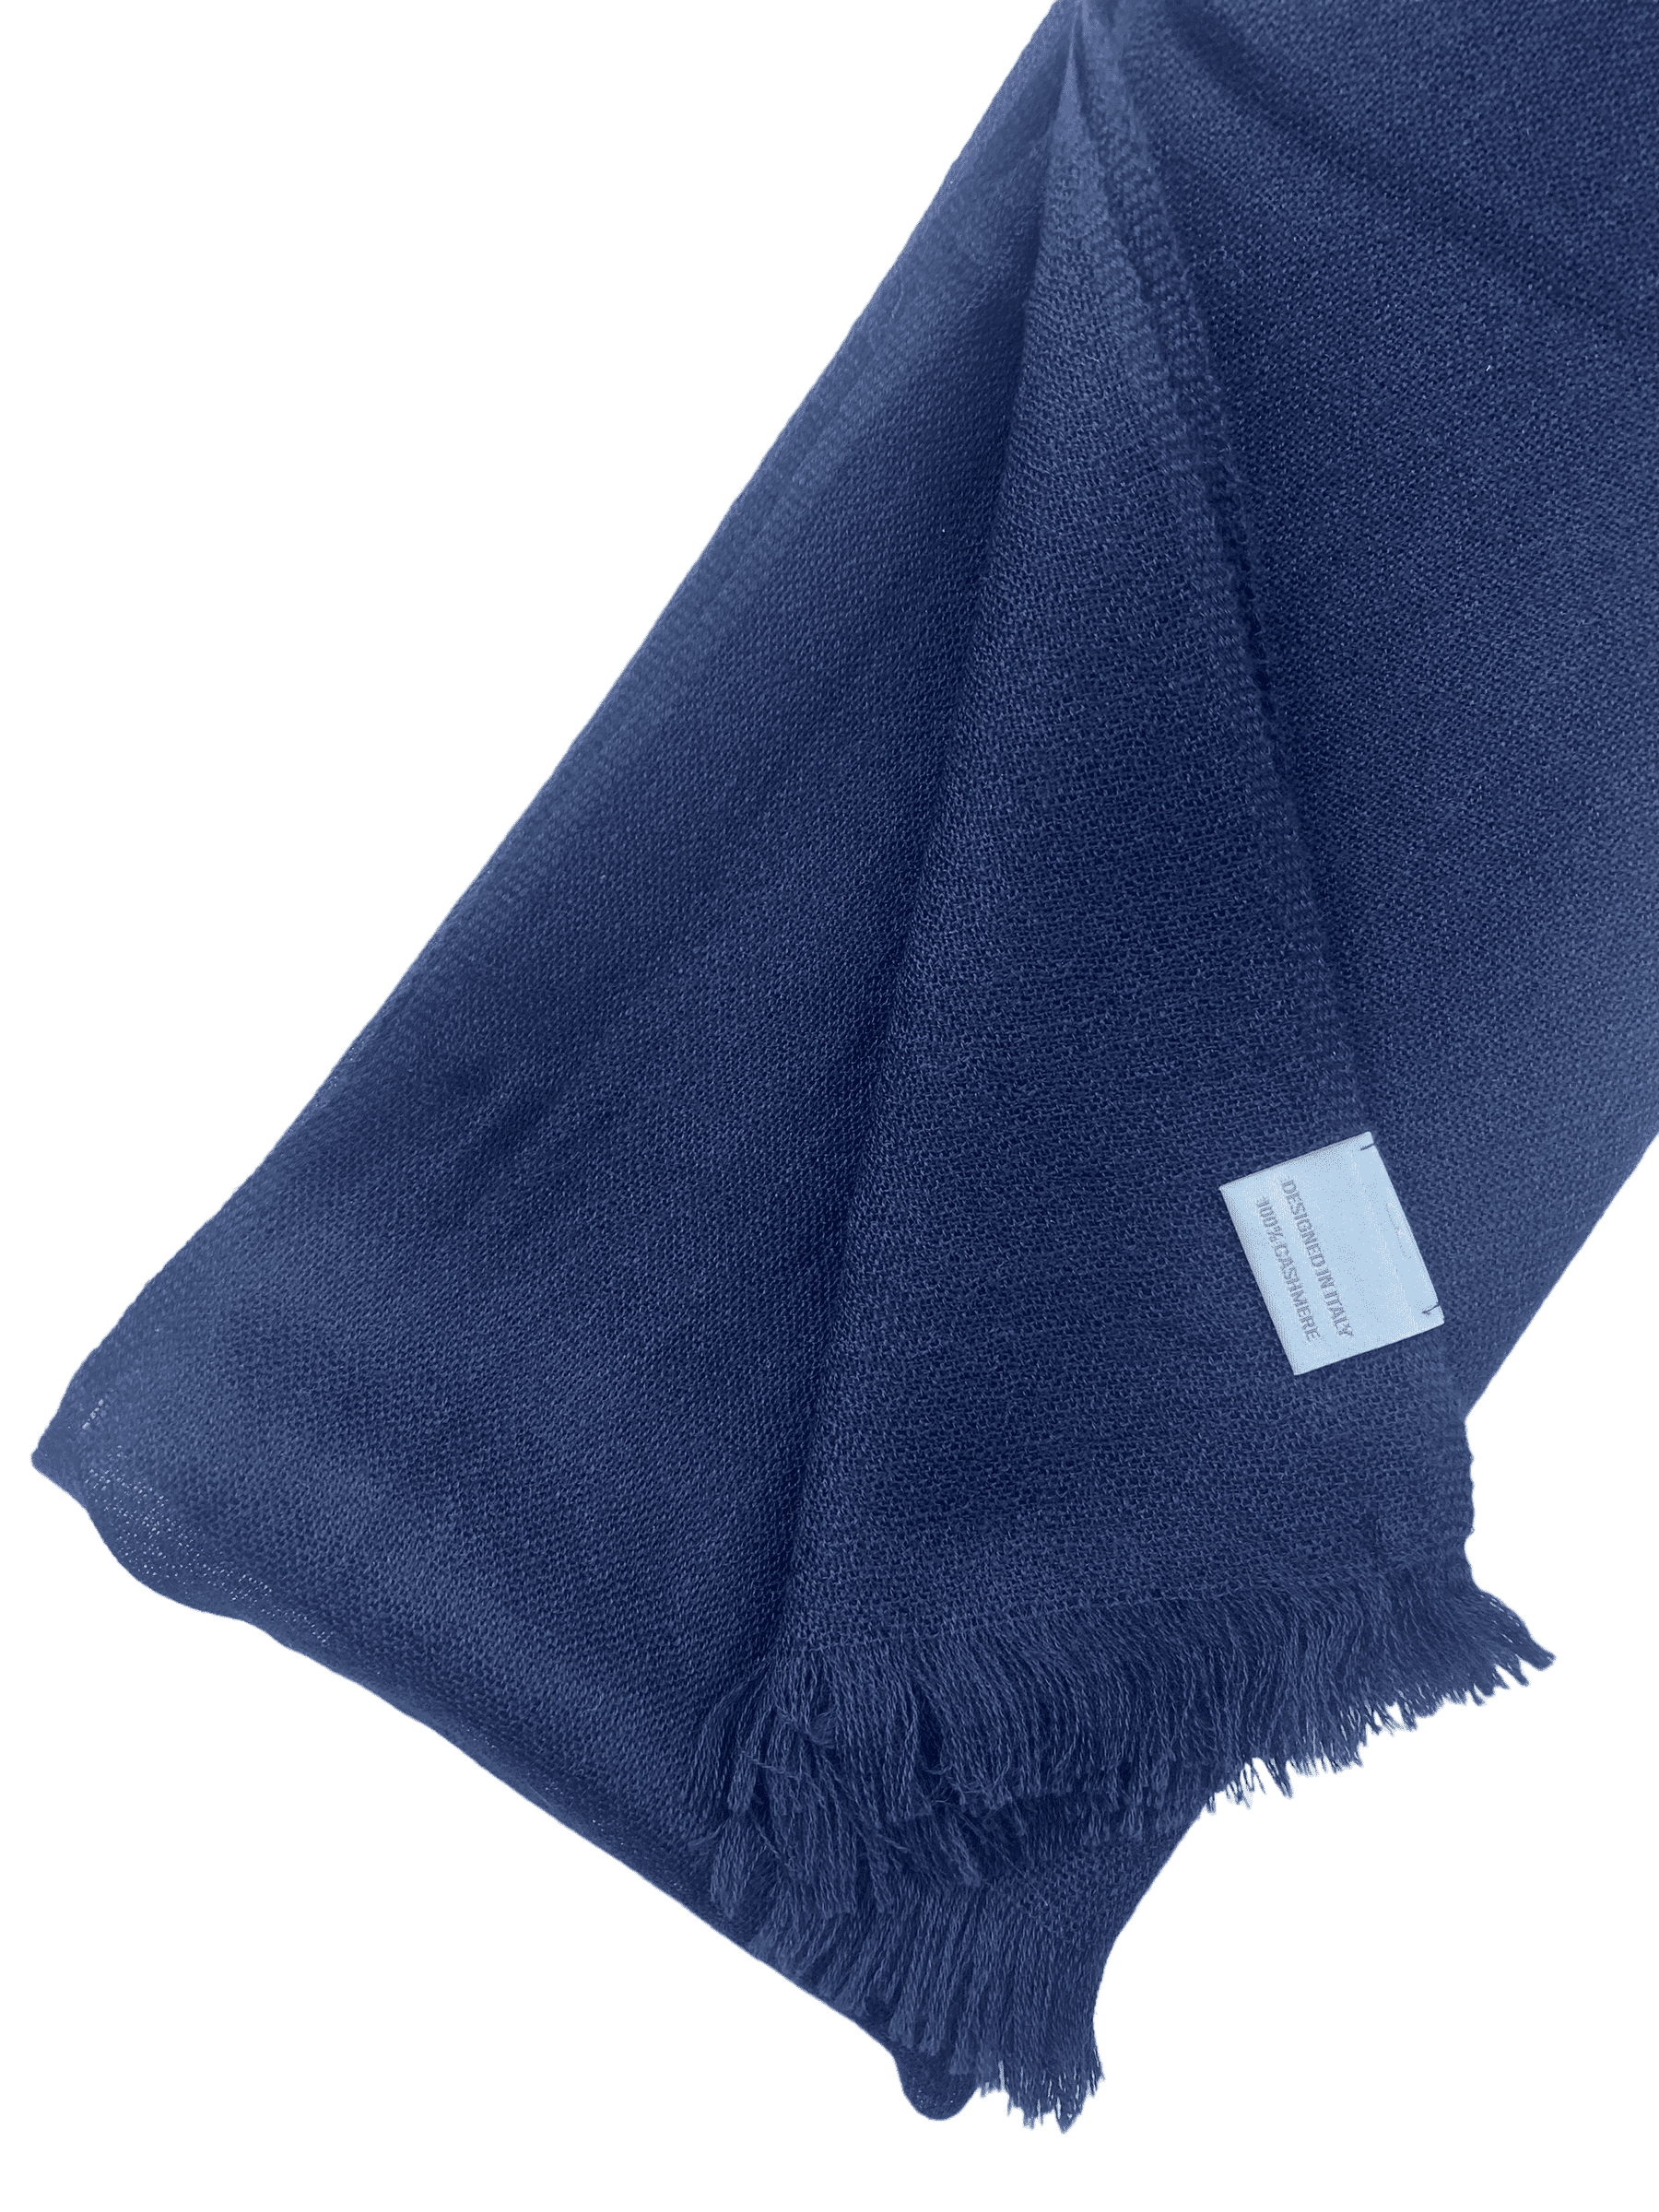 Rolex Navy Cashmere Scarf — Genuine Design Luxury Consignment Calgary, Alberta, Canada New and Pre-Owned Clothing, Shoes, Accessories.